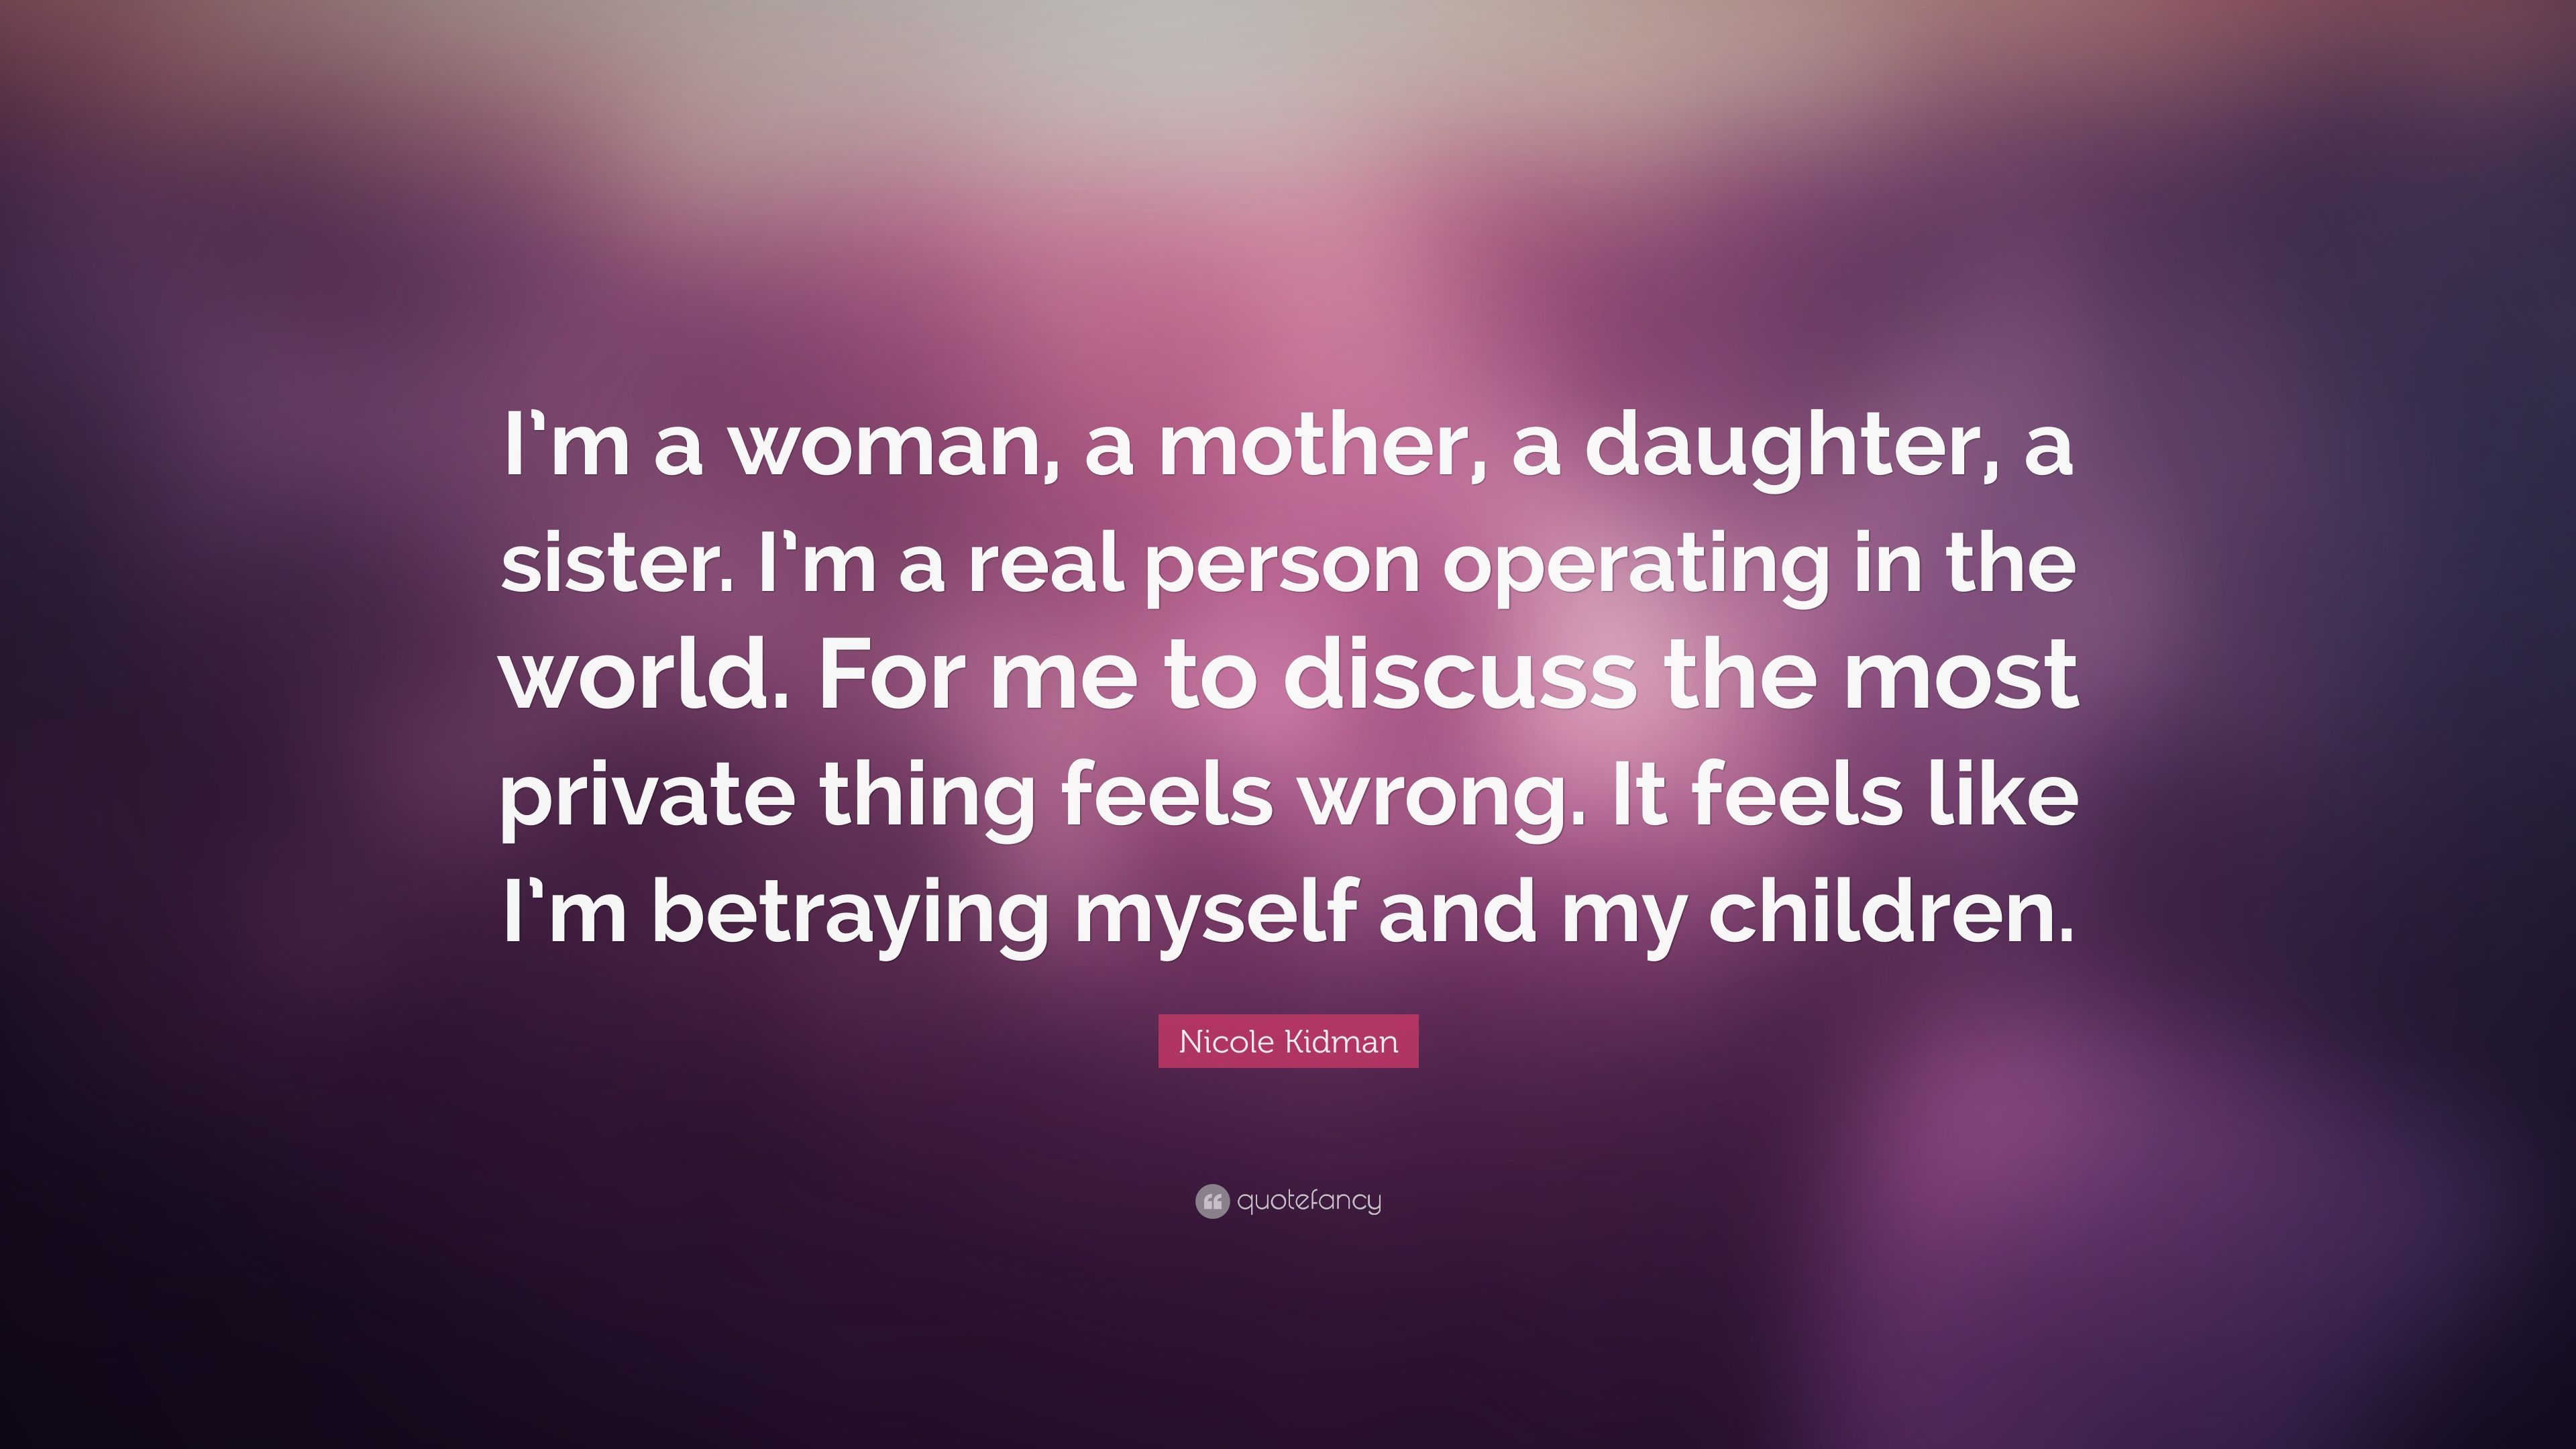 Nicole Kidman Quote: “I'm a woman, a mother, a daughter, a sister